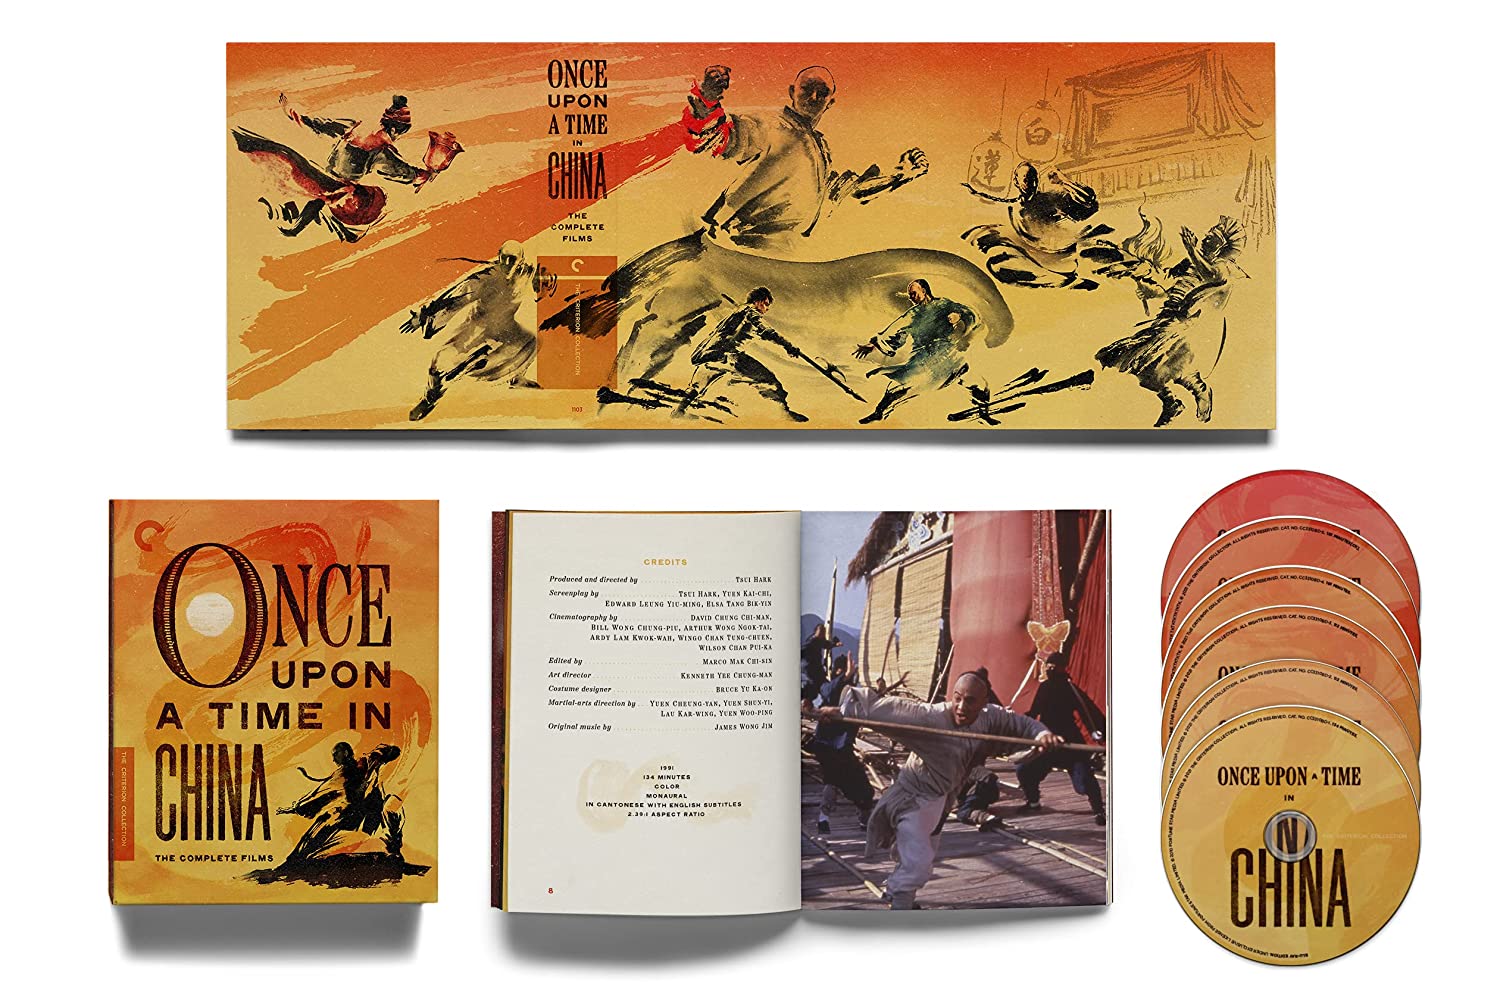 Once Upon a Time in China- The Complete Films The Criterion Collection Blu-ray open